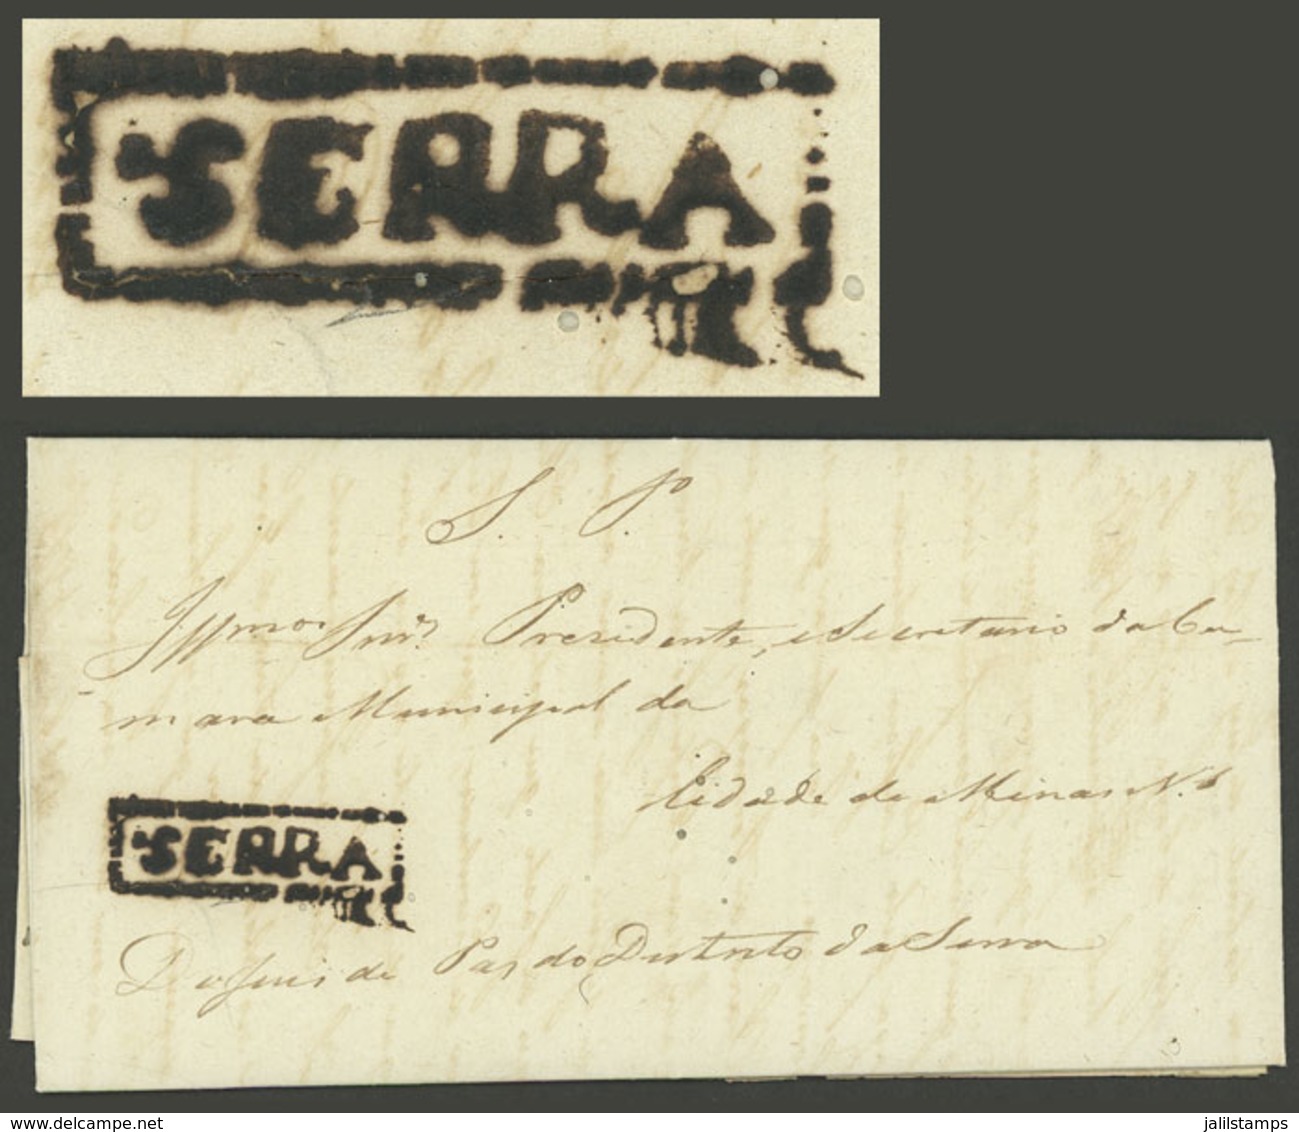 BRAZIL: Entire Letter Sent To Minas Novas On 18/MAY/1841, With The Pre-stamp Framed SERRA Mark Perfectly Applied, Handso - Cartoline Maximum